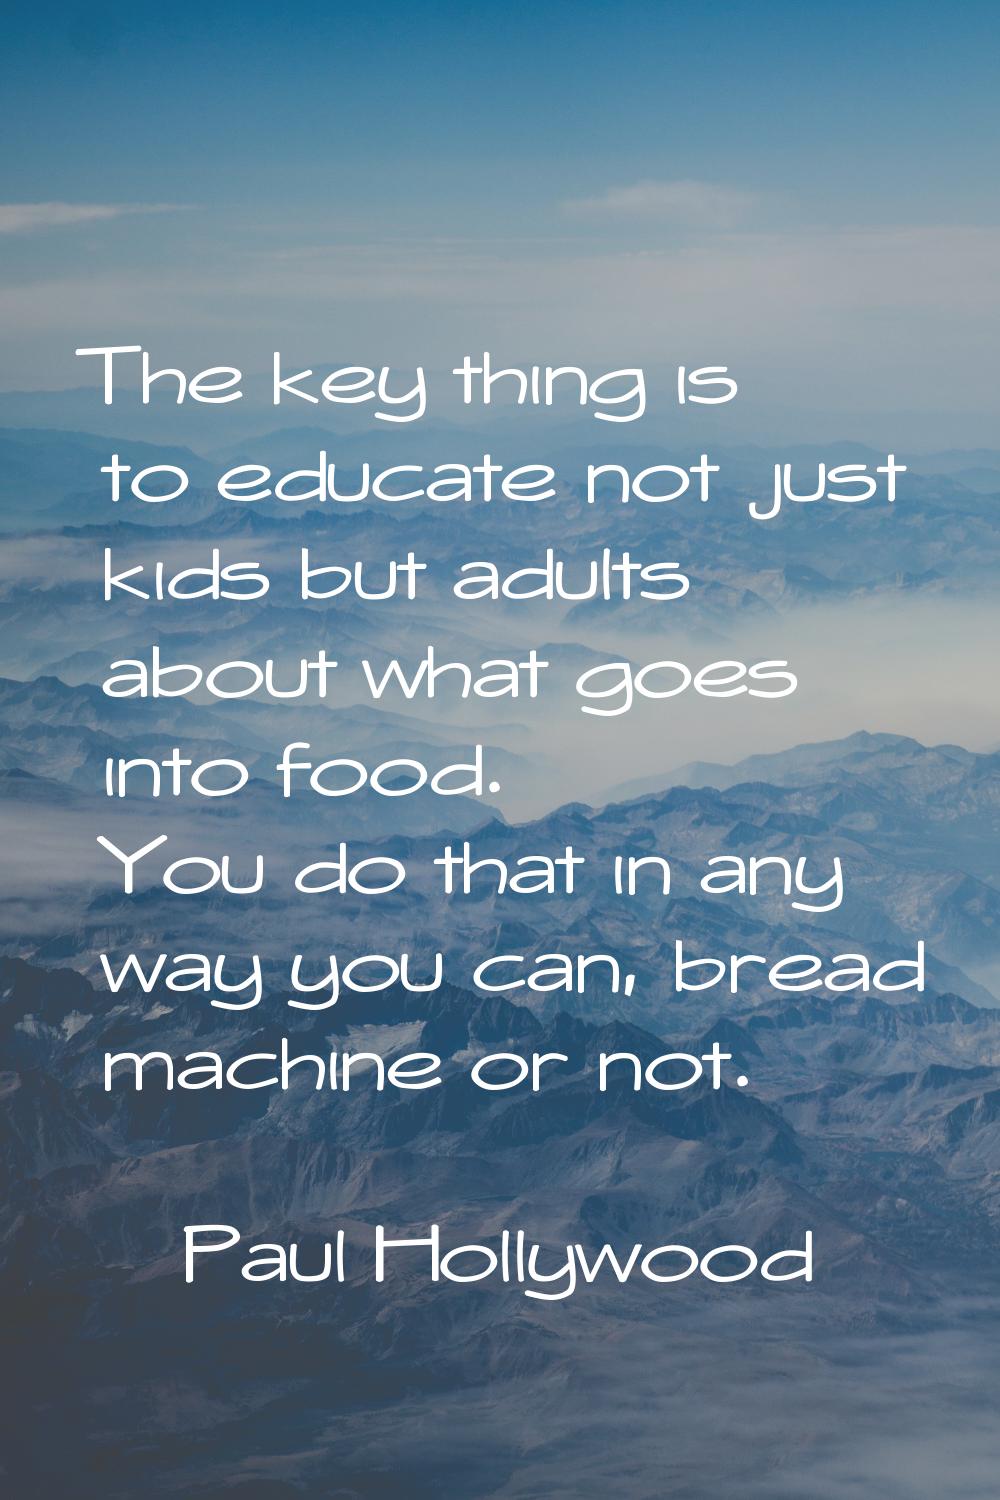 The key thing is to educate not just kids but adults about what goes into food. You do that in any 